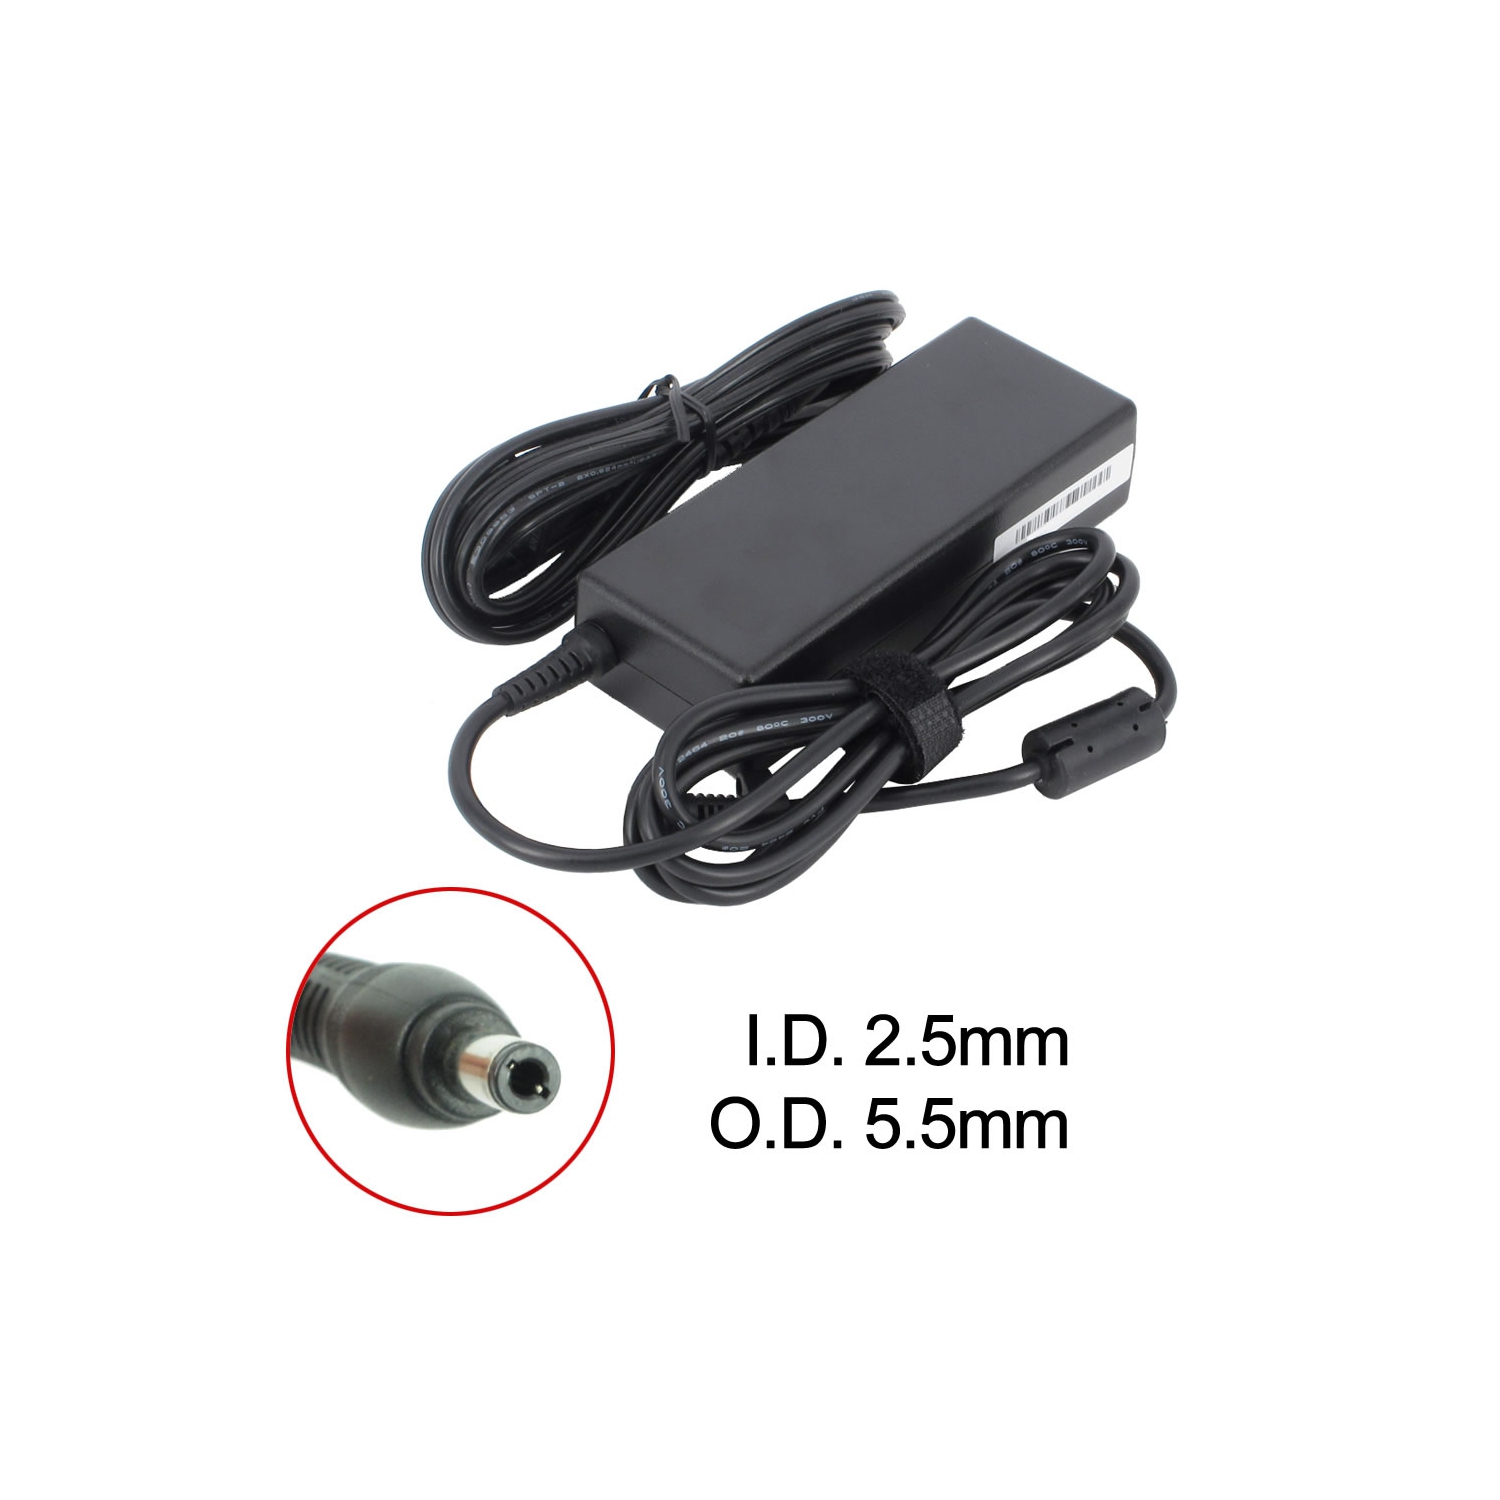 New Laptop AC Adapter for Lenovo IdeaPad Y480P, 103942, 808-875692-010A, 9T458, ADP-65 HB BBEF, PA-1900-36, SA80-3115